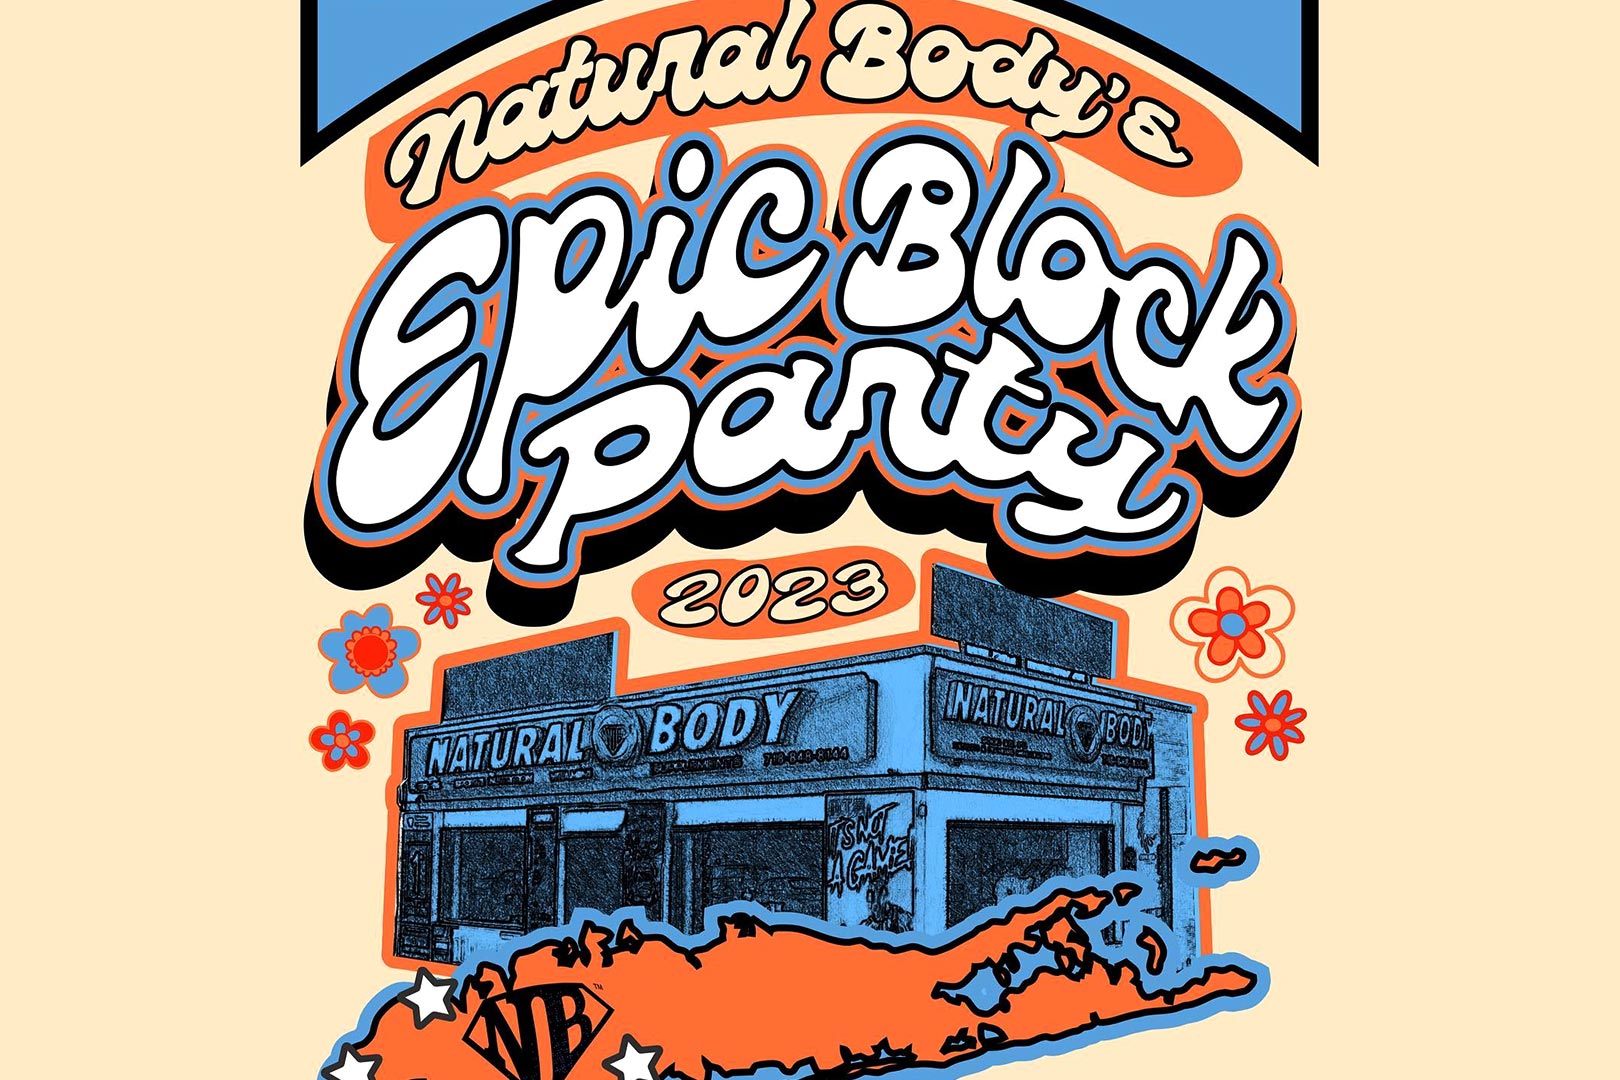 Natural Body Block Party 2023 Announcement